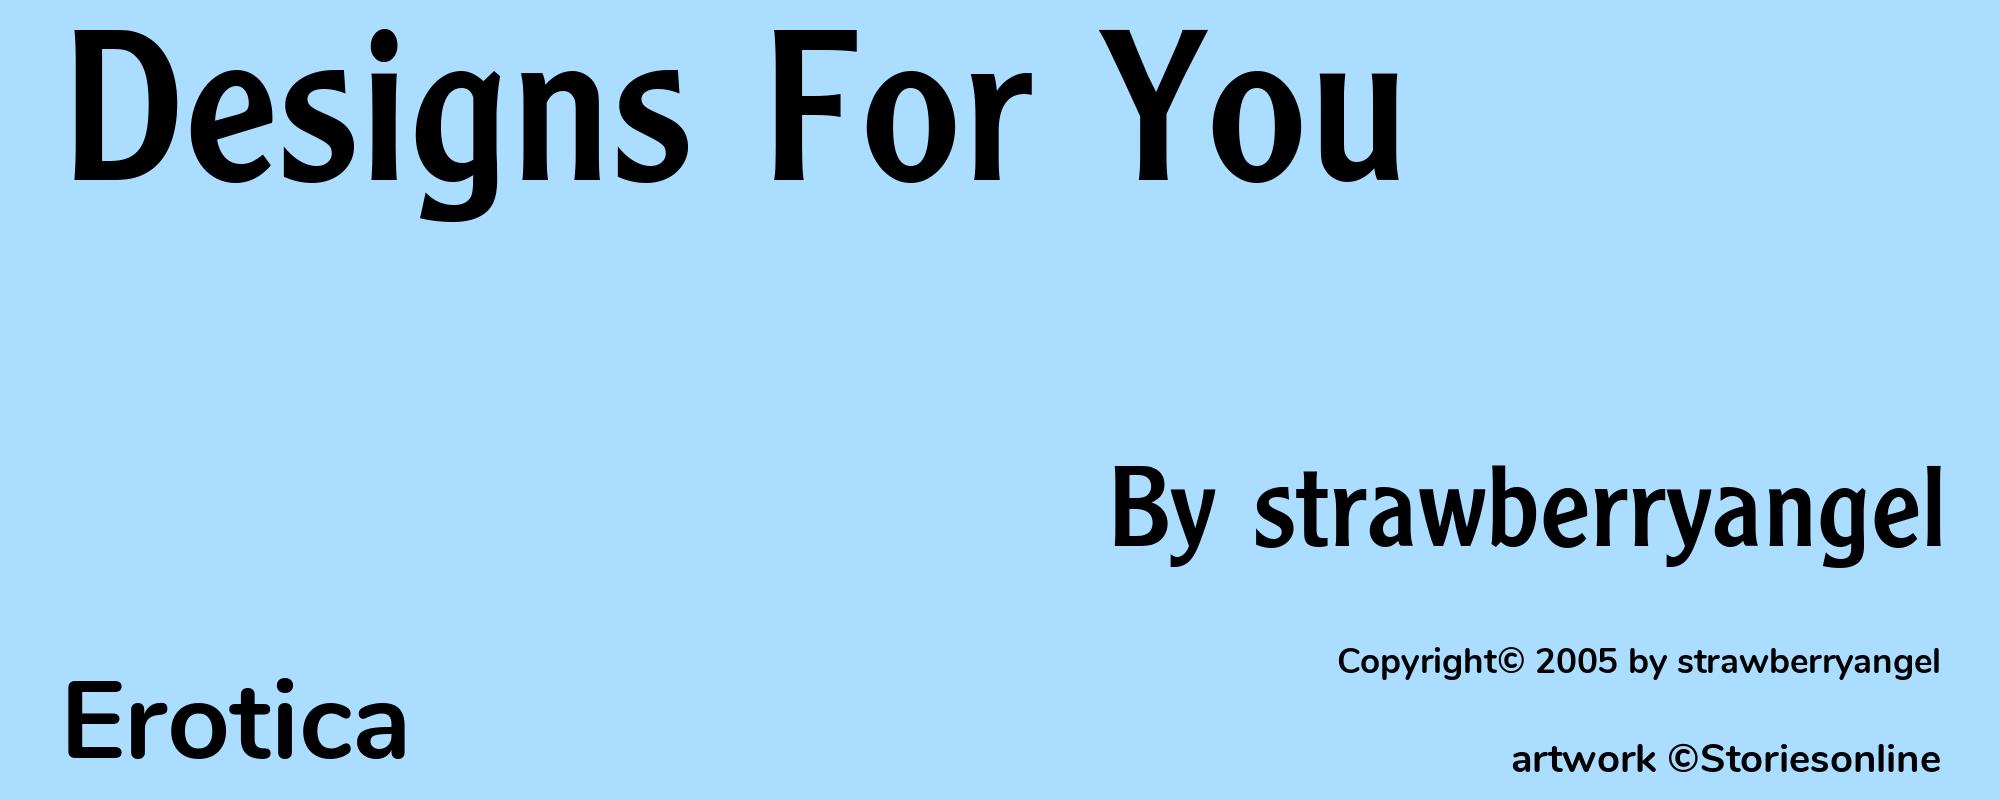 Designs For You - Cover